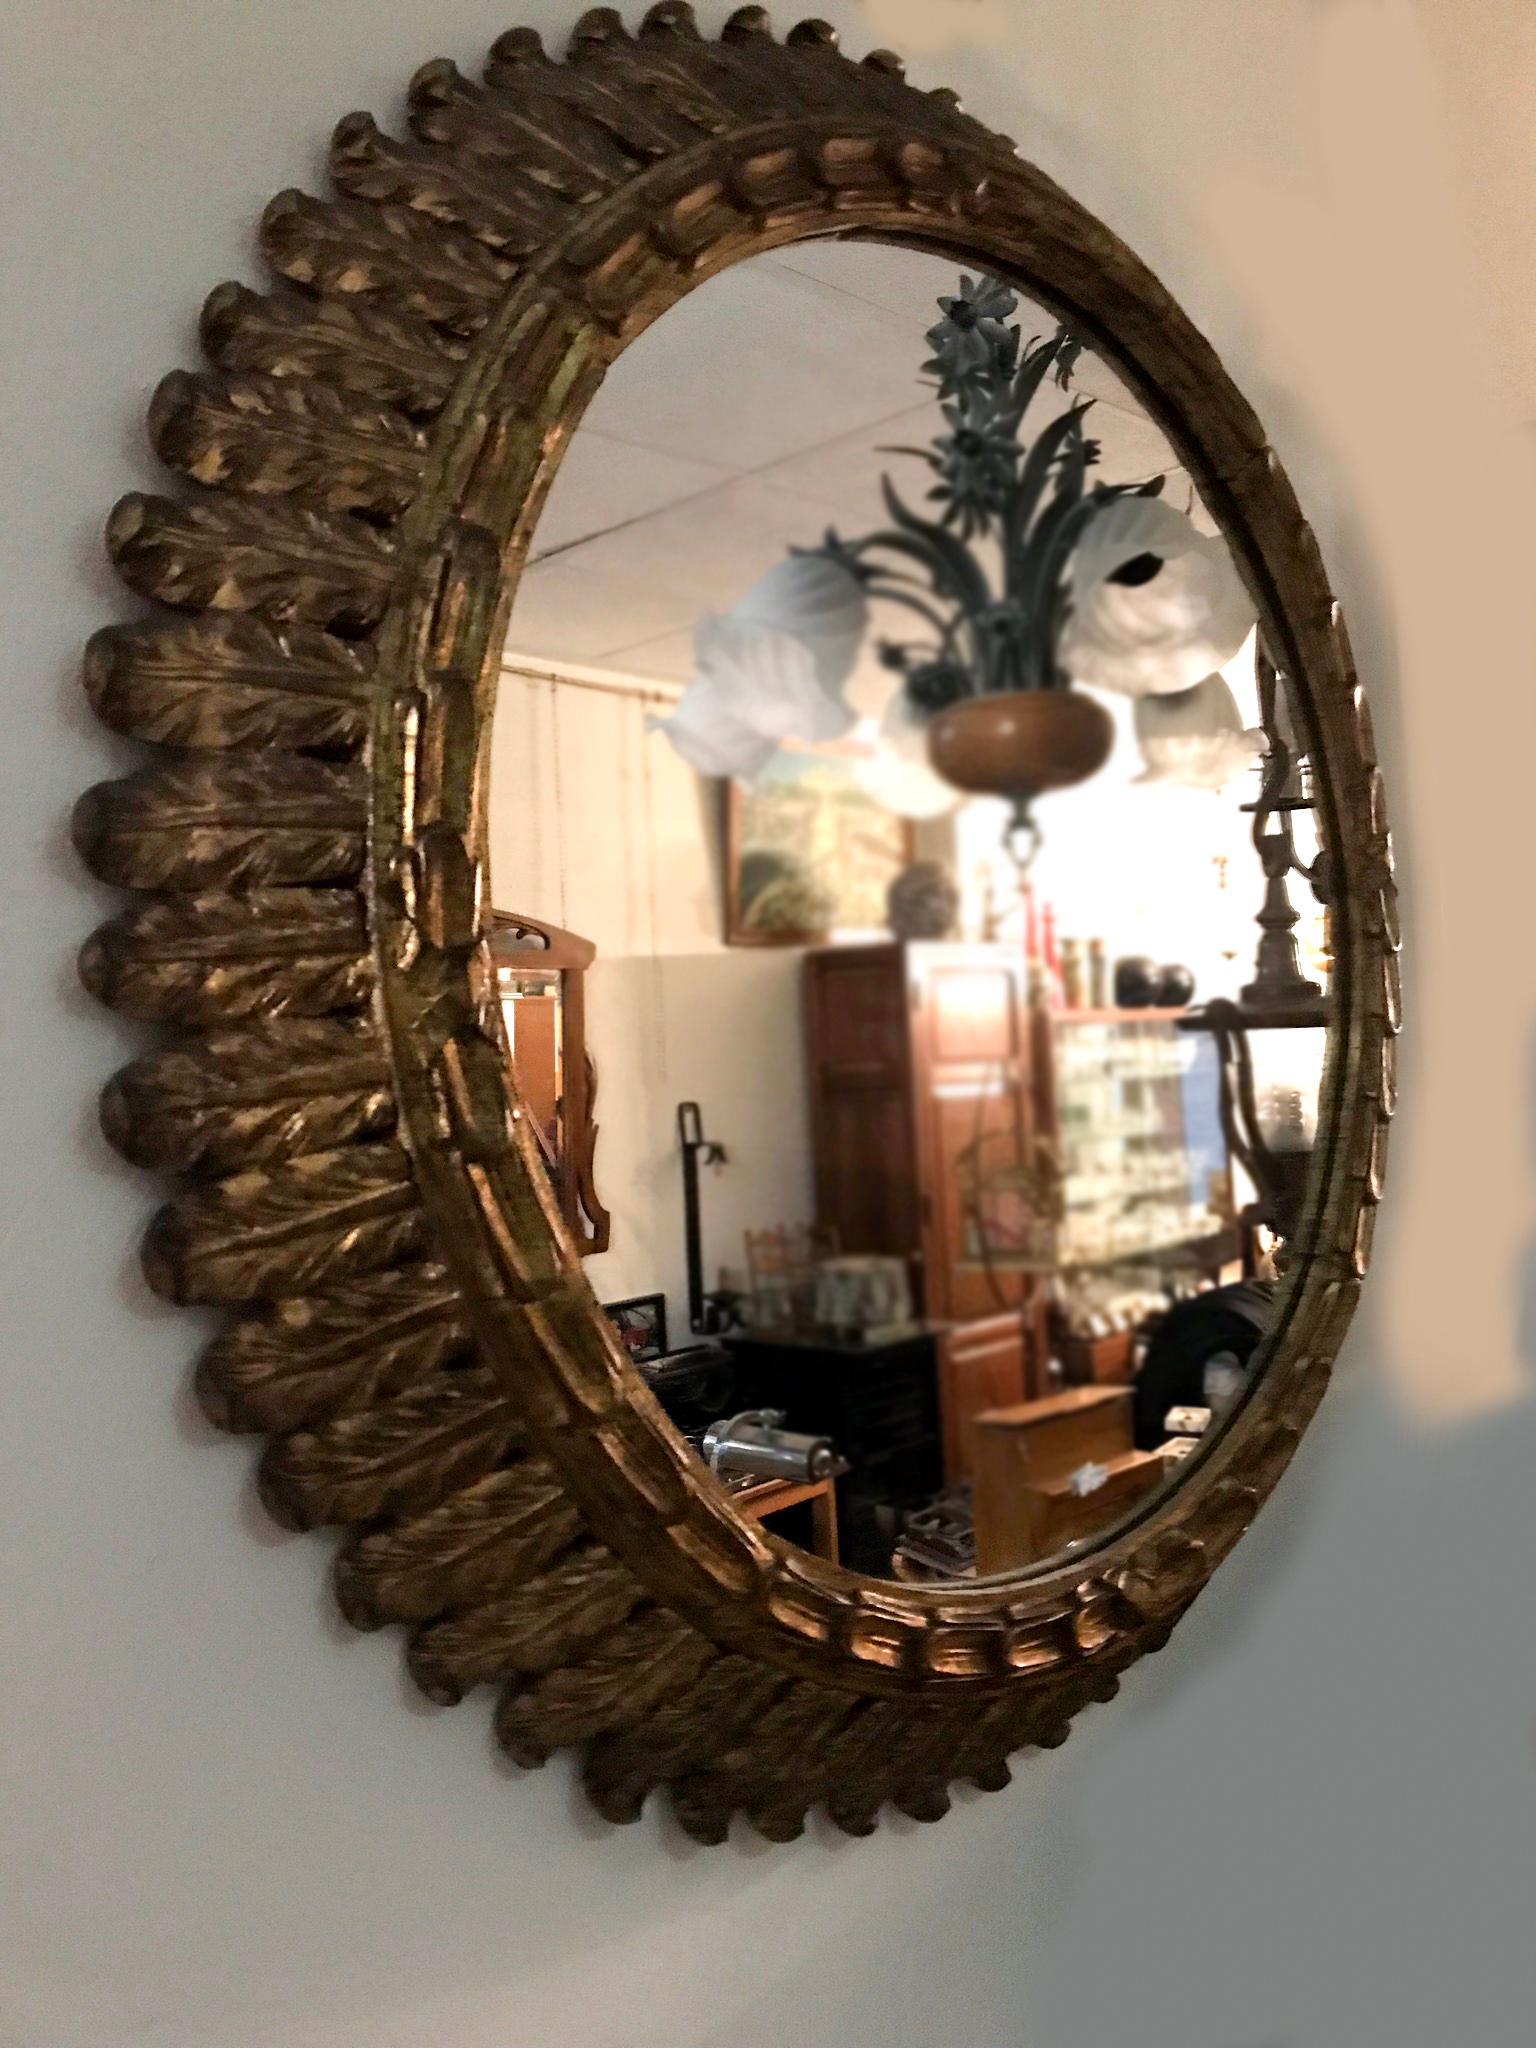 Large mid-20th century carved giltwood sunburst mirror.

Create a focal point in any room with this gleaming sun mirror. Hand carved, circa 1950, the large midcentury piece is decorated with intricate carvings throughout the foliage and has a